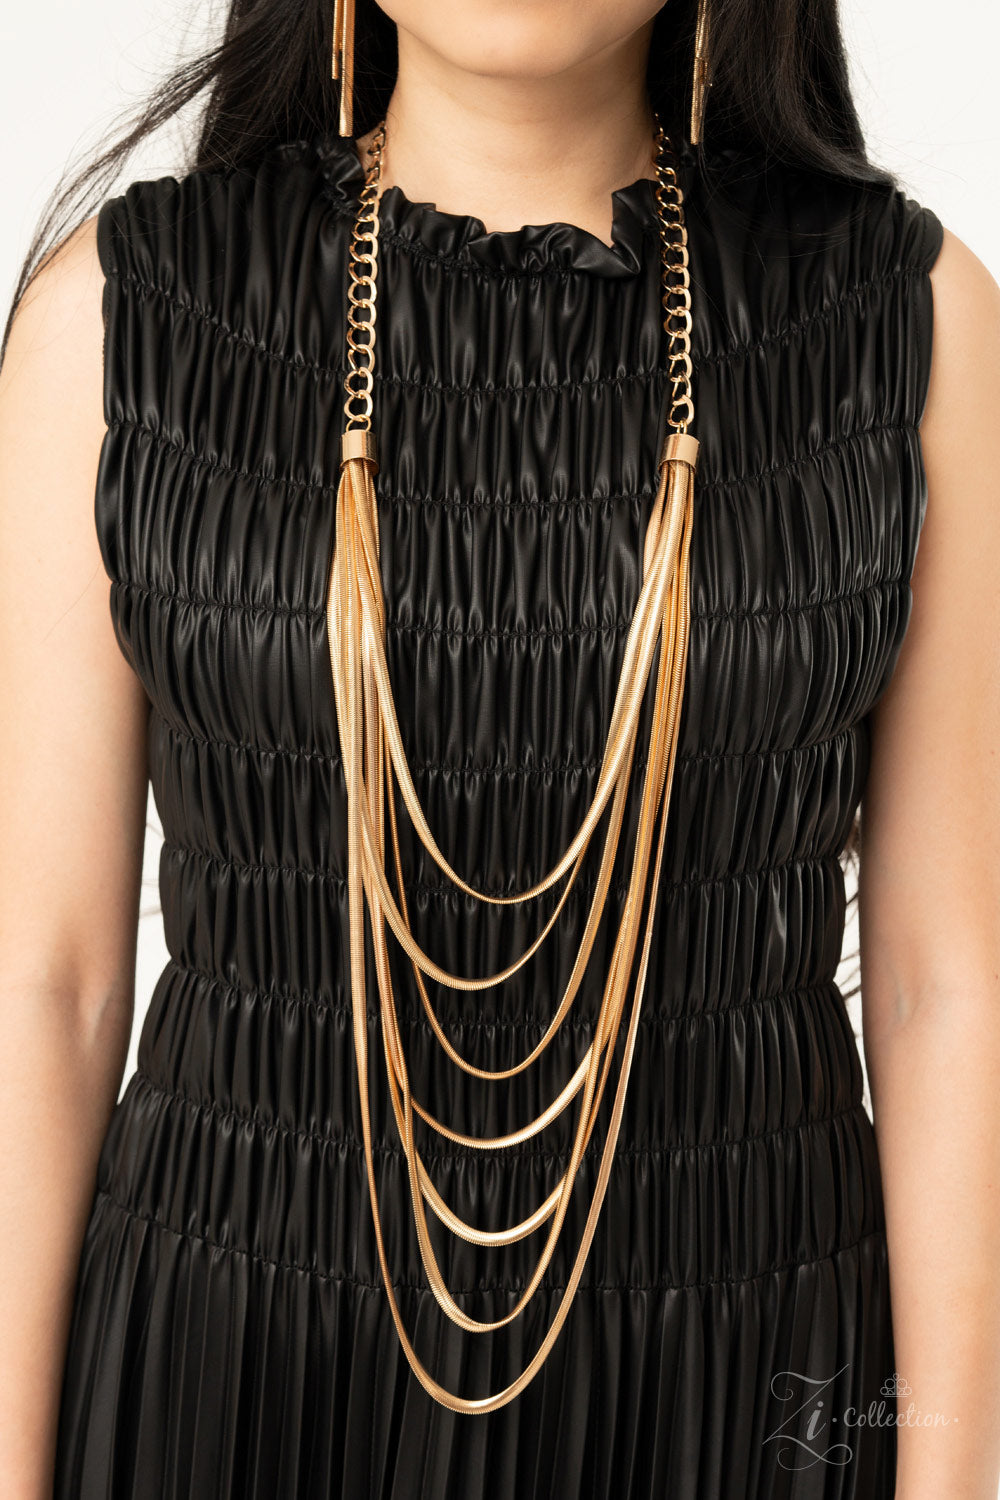 Paparazzi  - Commanding Zi Collection Necklace 2020 - Paparazzi Accessories  bold fittings, lengthened rows of gold herringbone chains layer flawlessly together across the chest. The sleek display attaches to strands of over-sized gold links, adding a gritty industrial edge to this majestic masterpiece. 